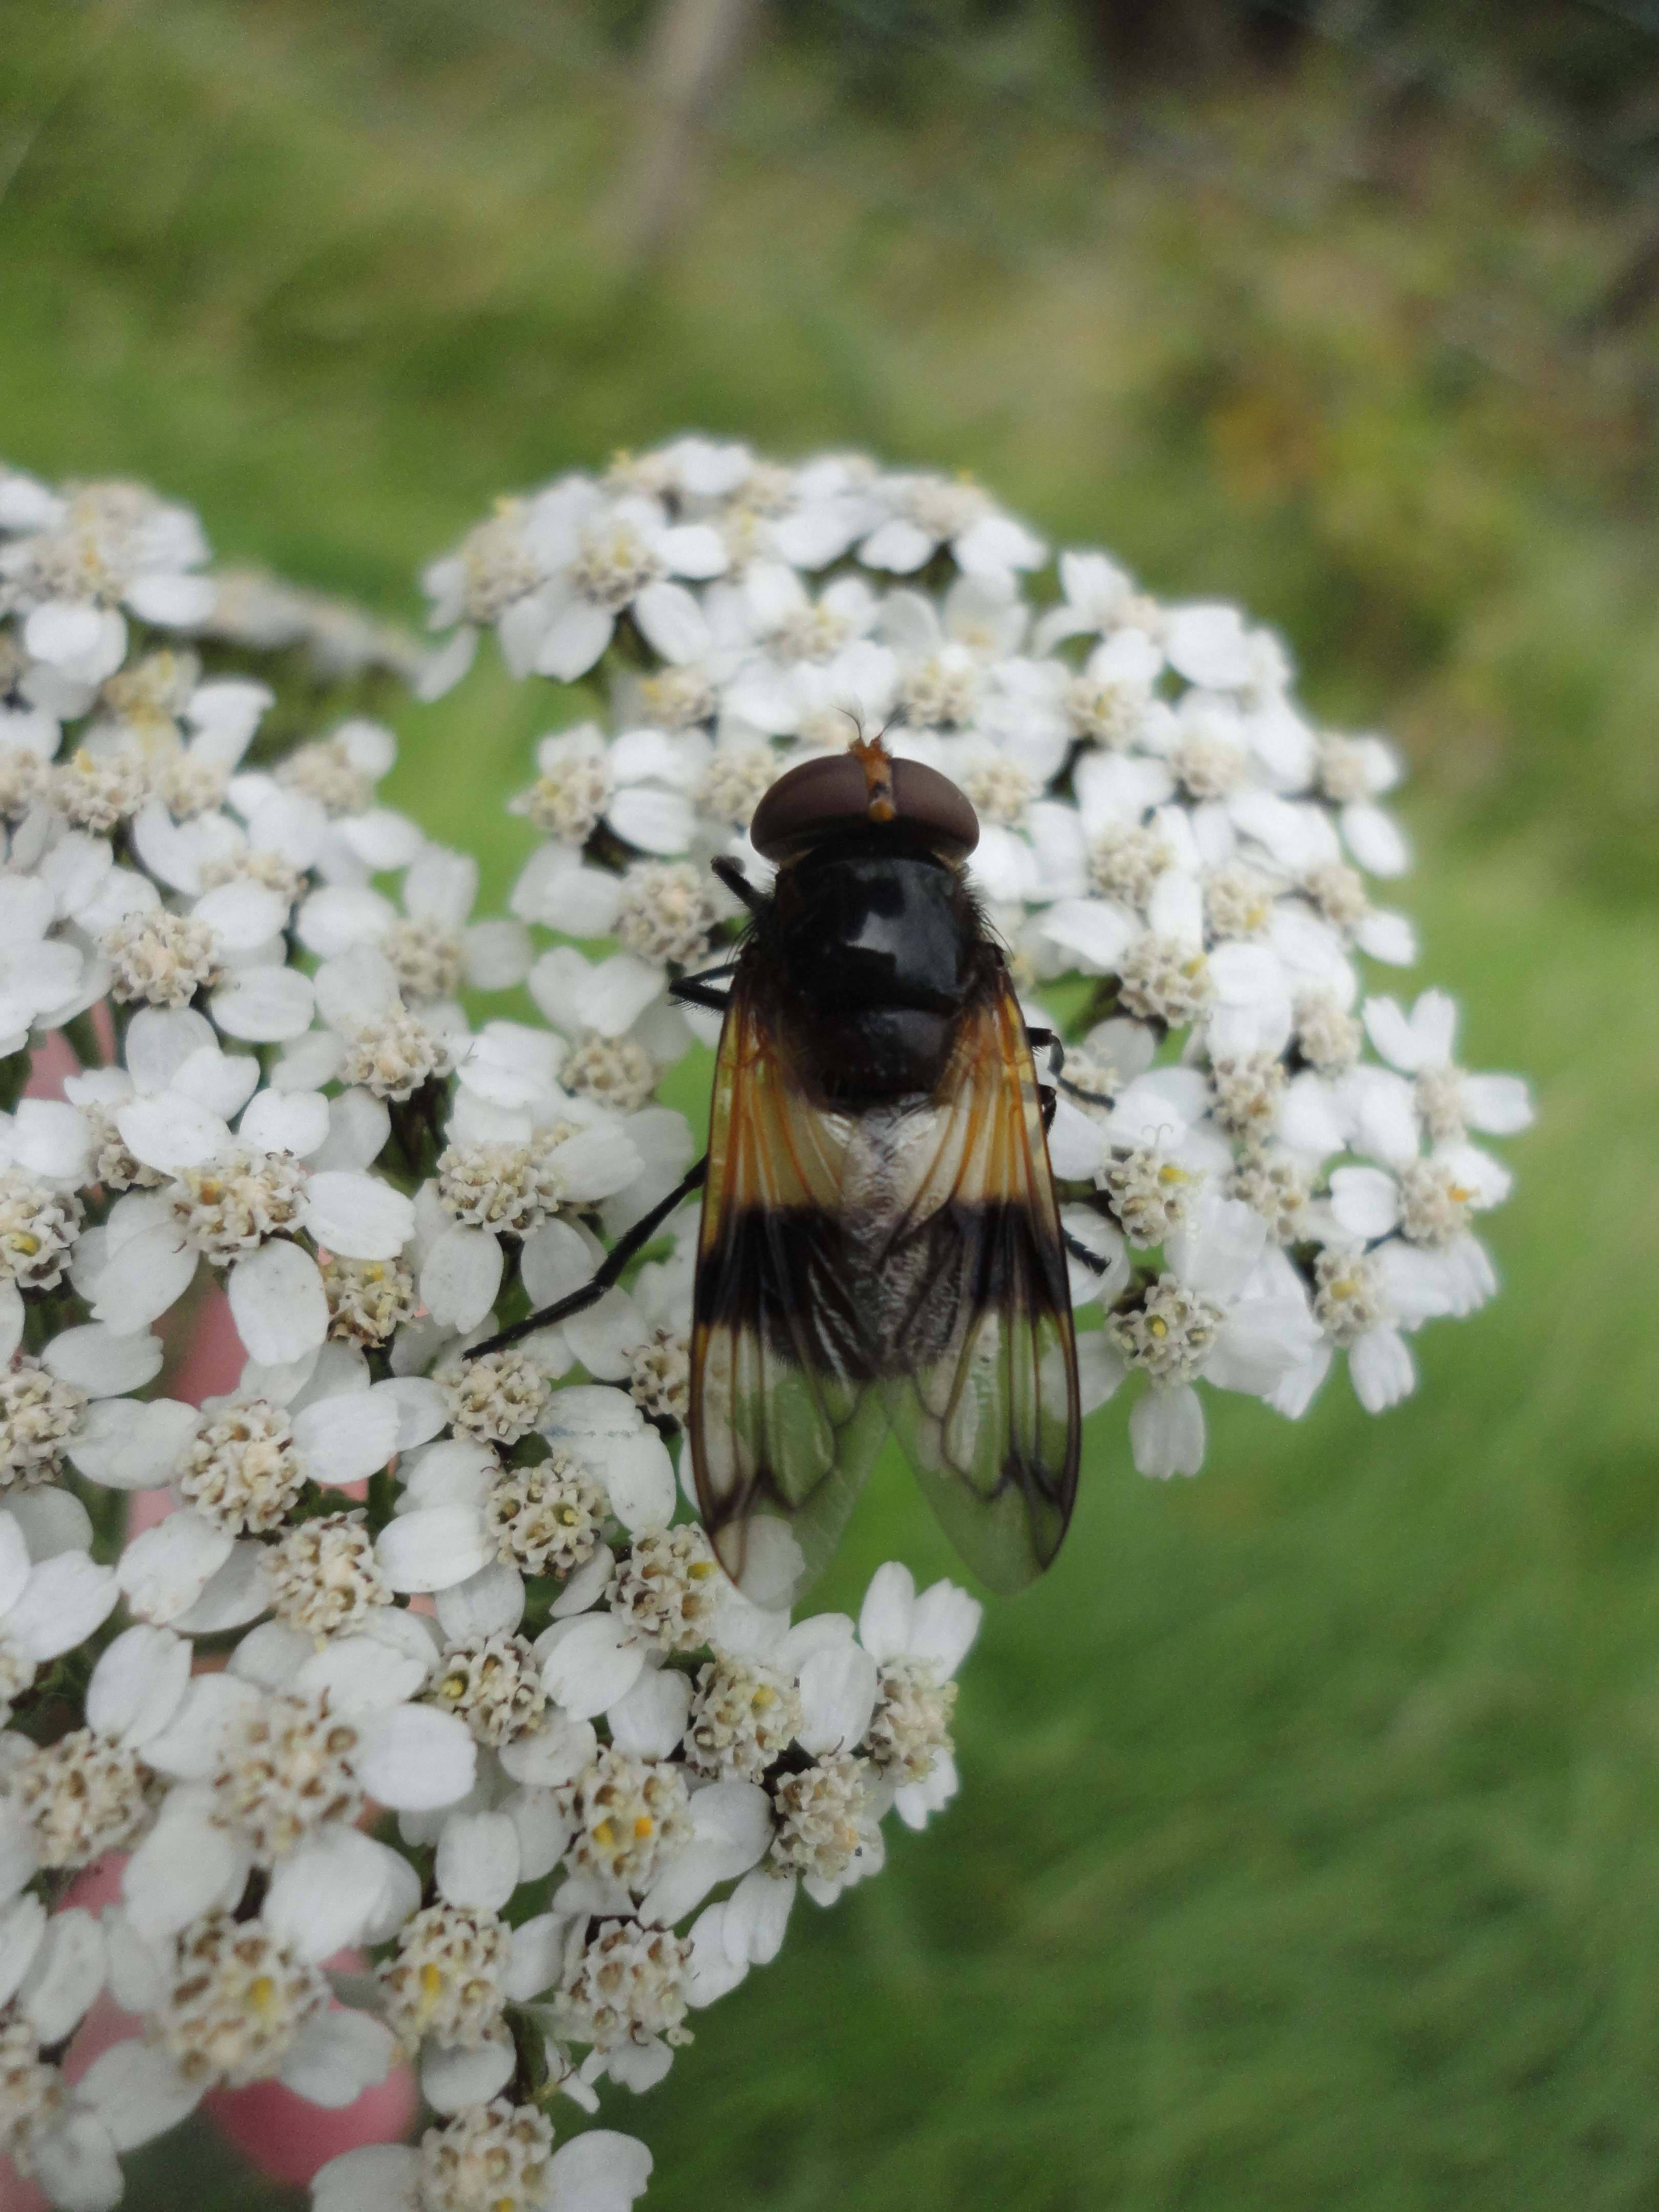 image of a striped hoverfly